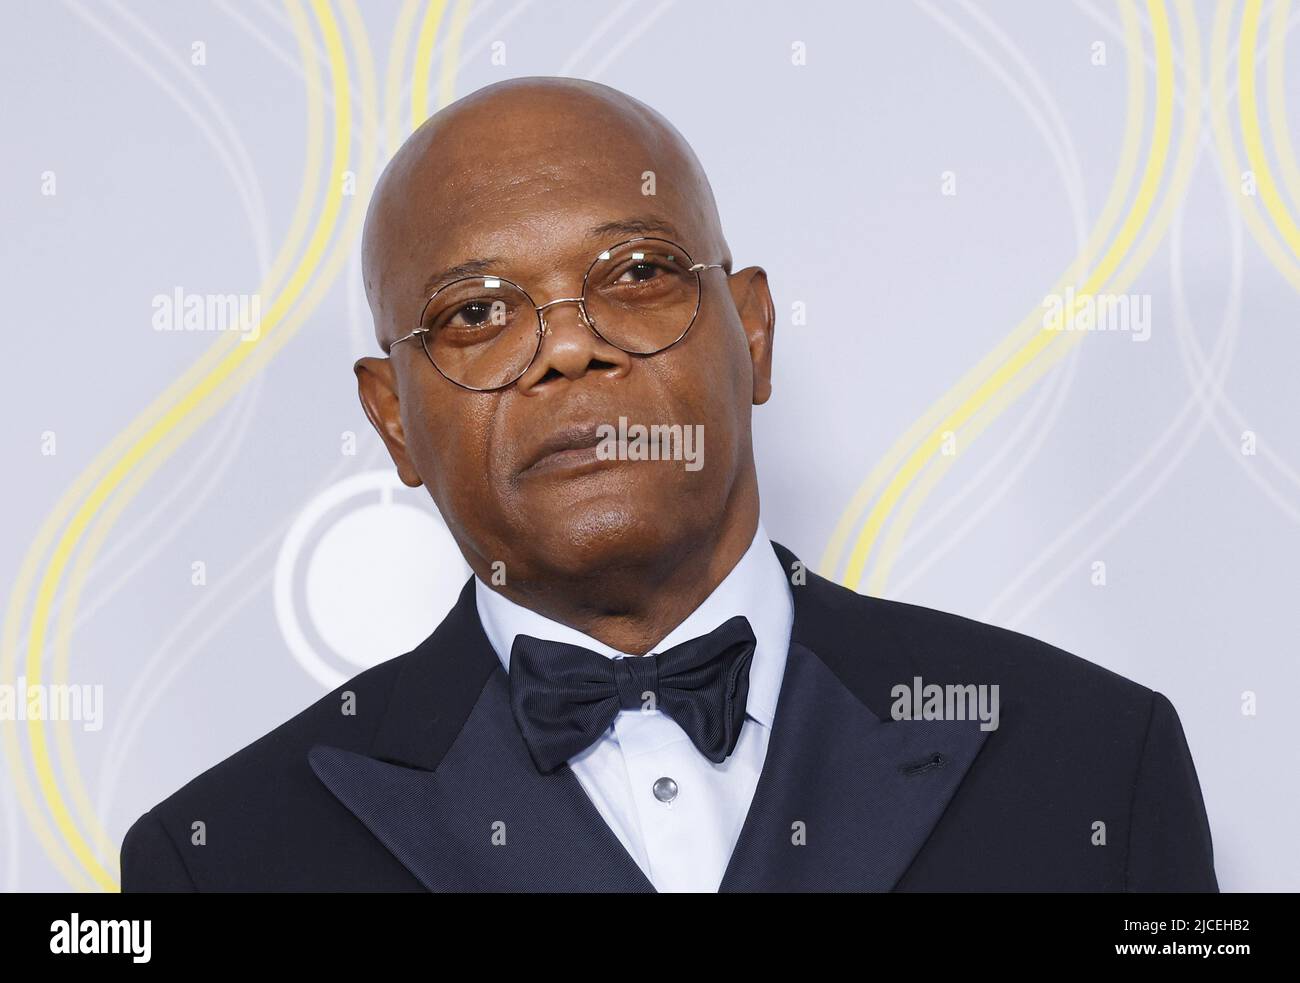 New York, United States. 12th June, 2022. Samuel L. Jackson arrives on the red carpet at The 75th Annual Tony Awards at Radio City Music Hall on June 12, 2022 in New York City. Photo by John Angelillo/UPI Credit: UPI/Alamy Live News Stock Photo